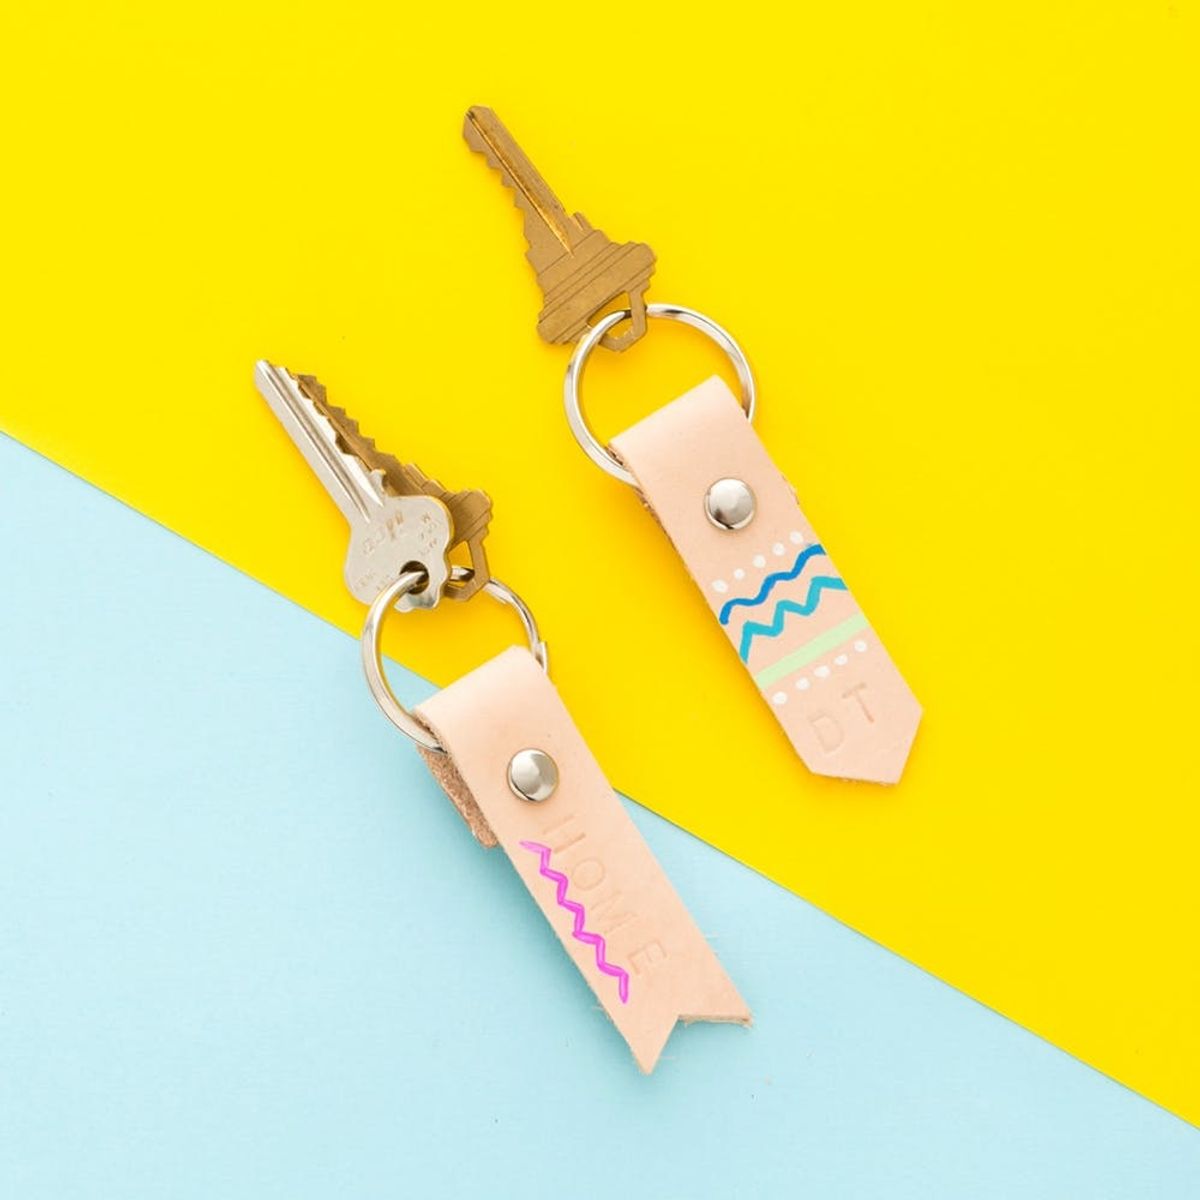 DIY These Fun Leather Stamped Key Fobs in Less Than 30 Minutes